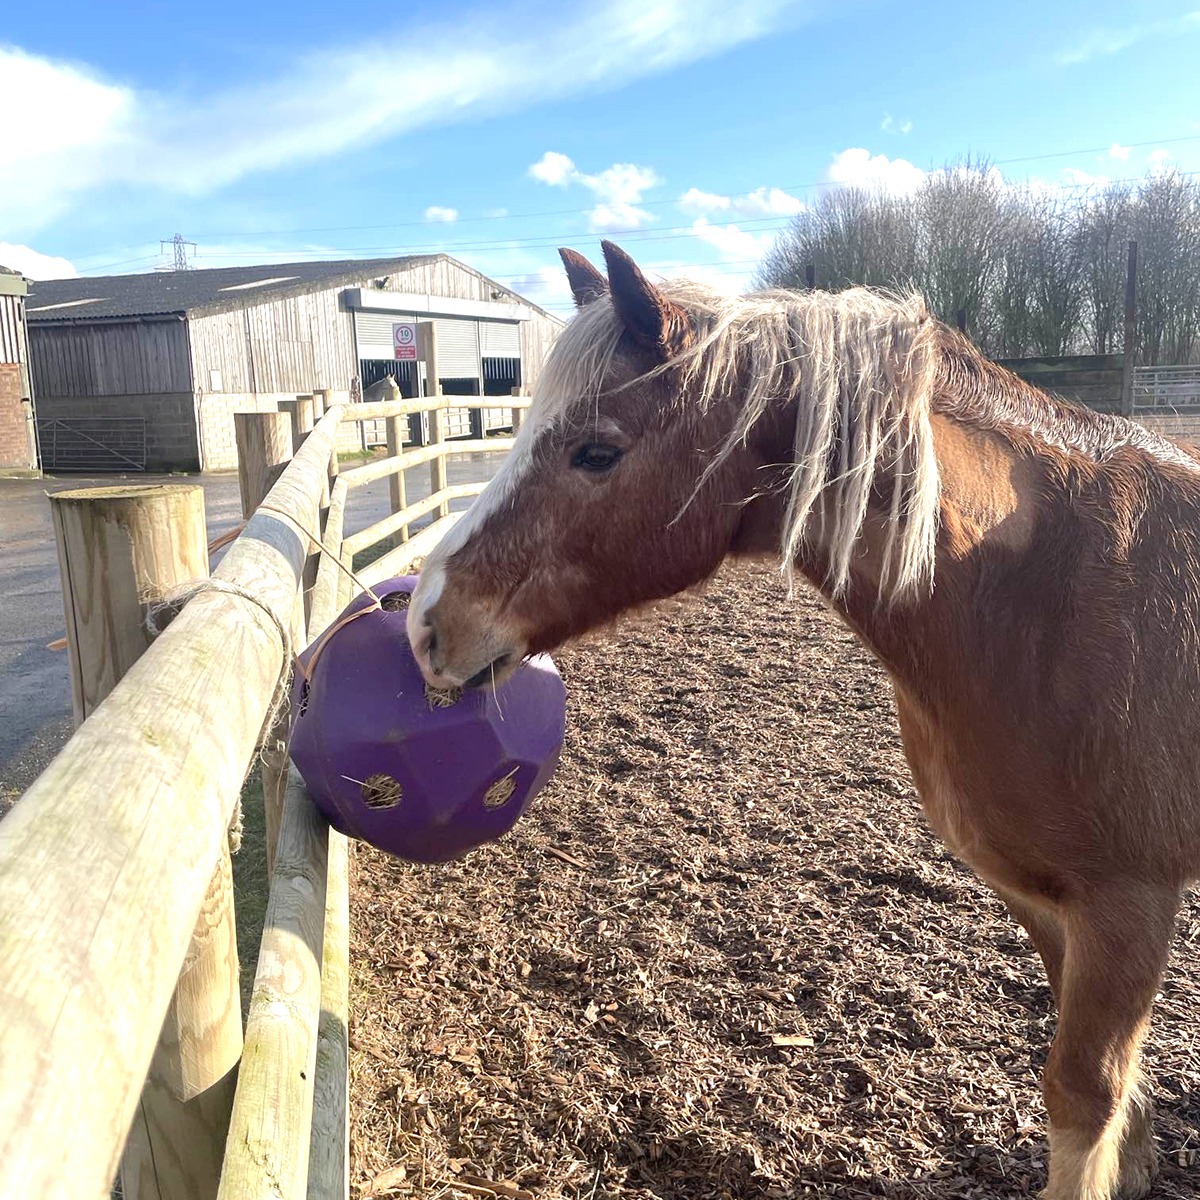 Ginge this morning, enjoying his hay ball as part of his herds enrichment.

Enrichment provides mental stimulation for equines in their fields and stables which help with their overall health well-being.

#horsesofinstagram #rescuehorses #animalcharity #animalwelfare